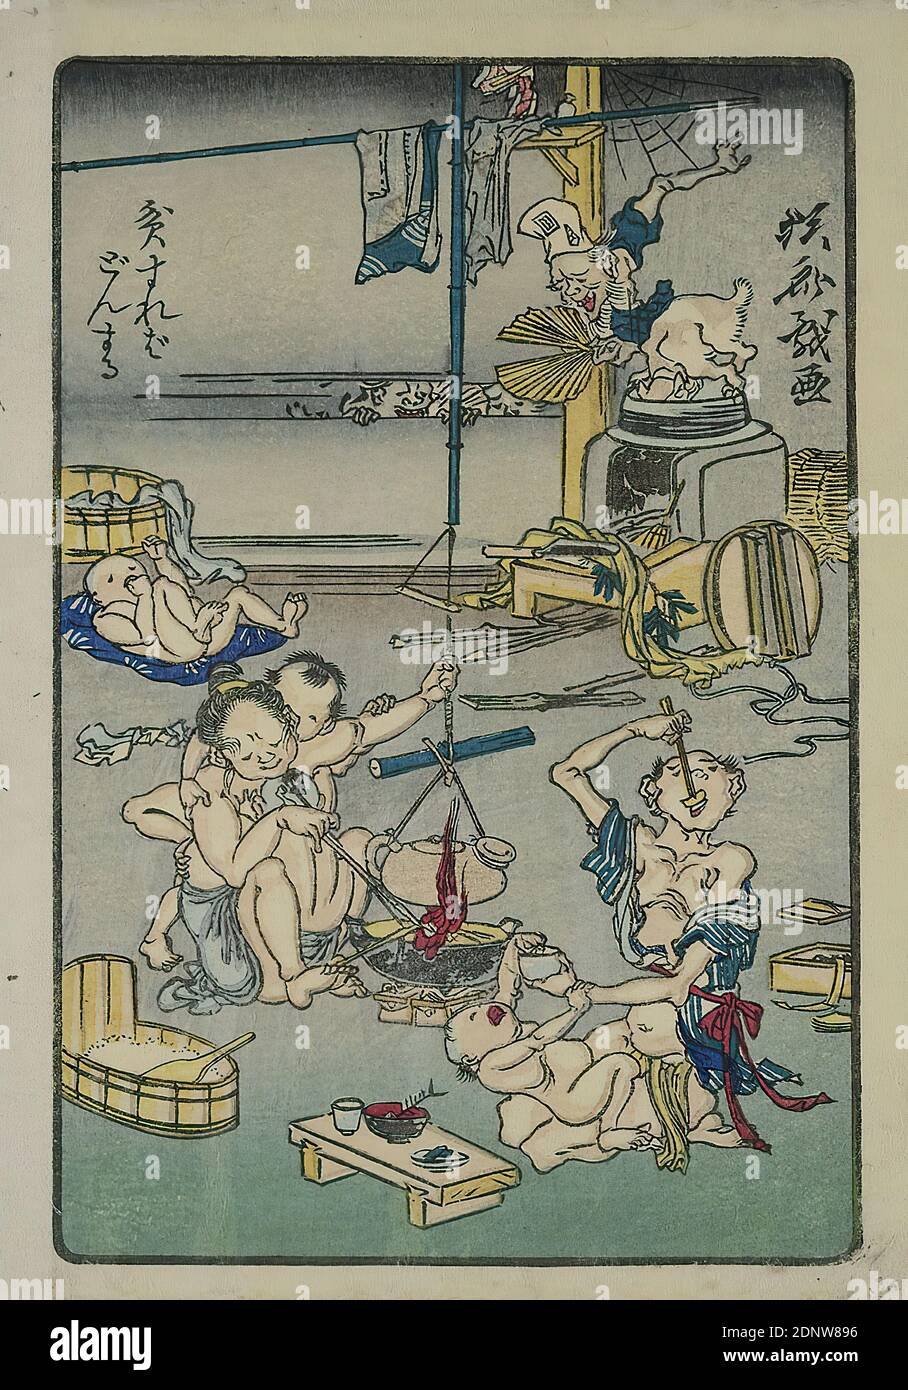 Kawanabe Kyōsai, Proverb: Love makes stupid, from the series: One hundred pictures from Kyōsai, color woodcut, Total: Height: 19.00 cm; Width: 13.50 cm, signed: Kyōsai giga 狂斎戯画, printmaking,printing, proverbs, family life, mythical creatures, monsters, legendary figures, cooking food/preparing food, Edo period Stock Photo